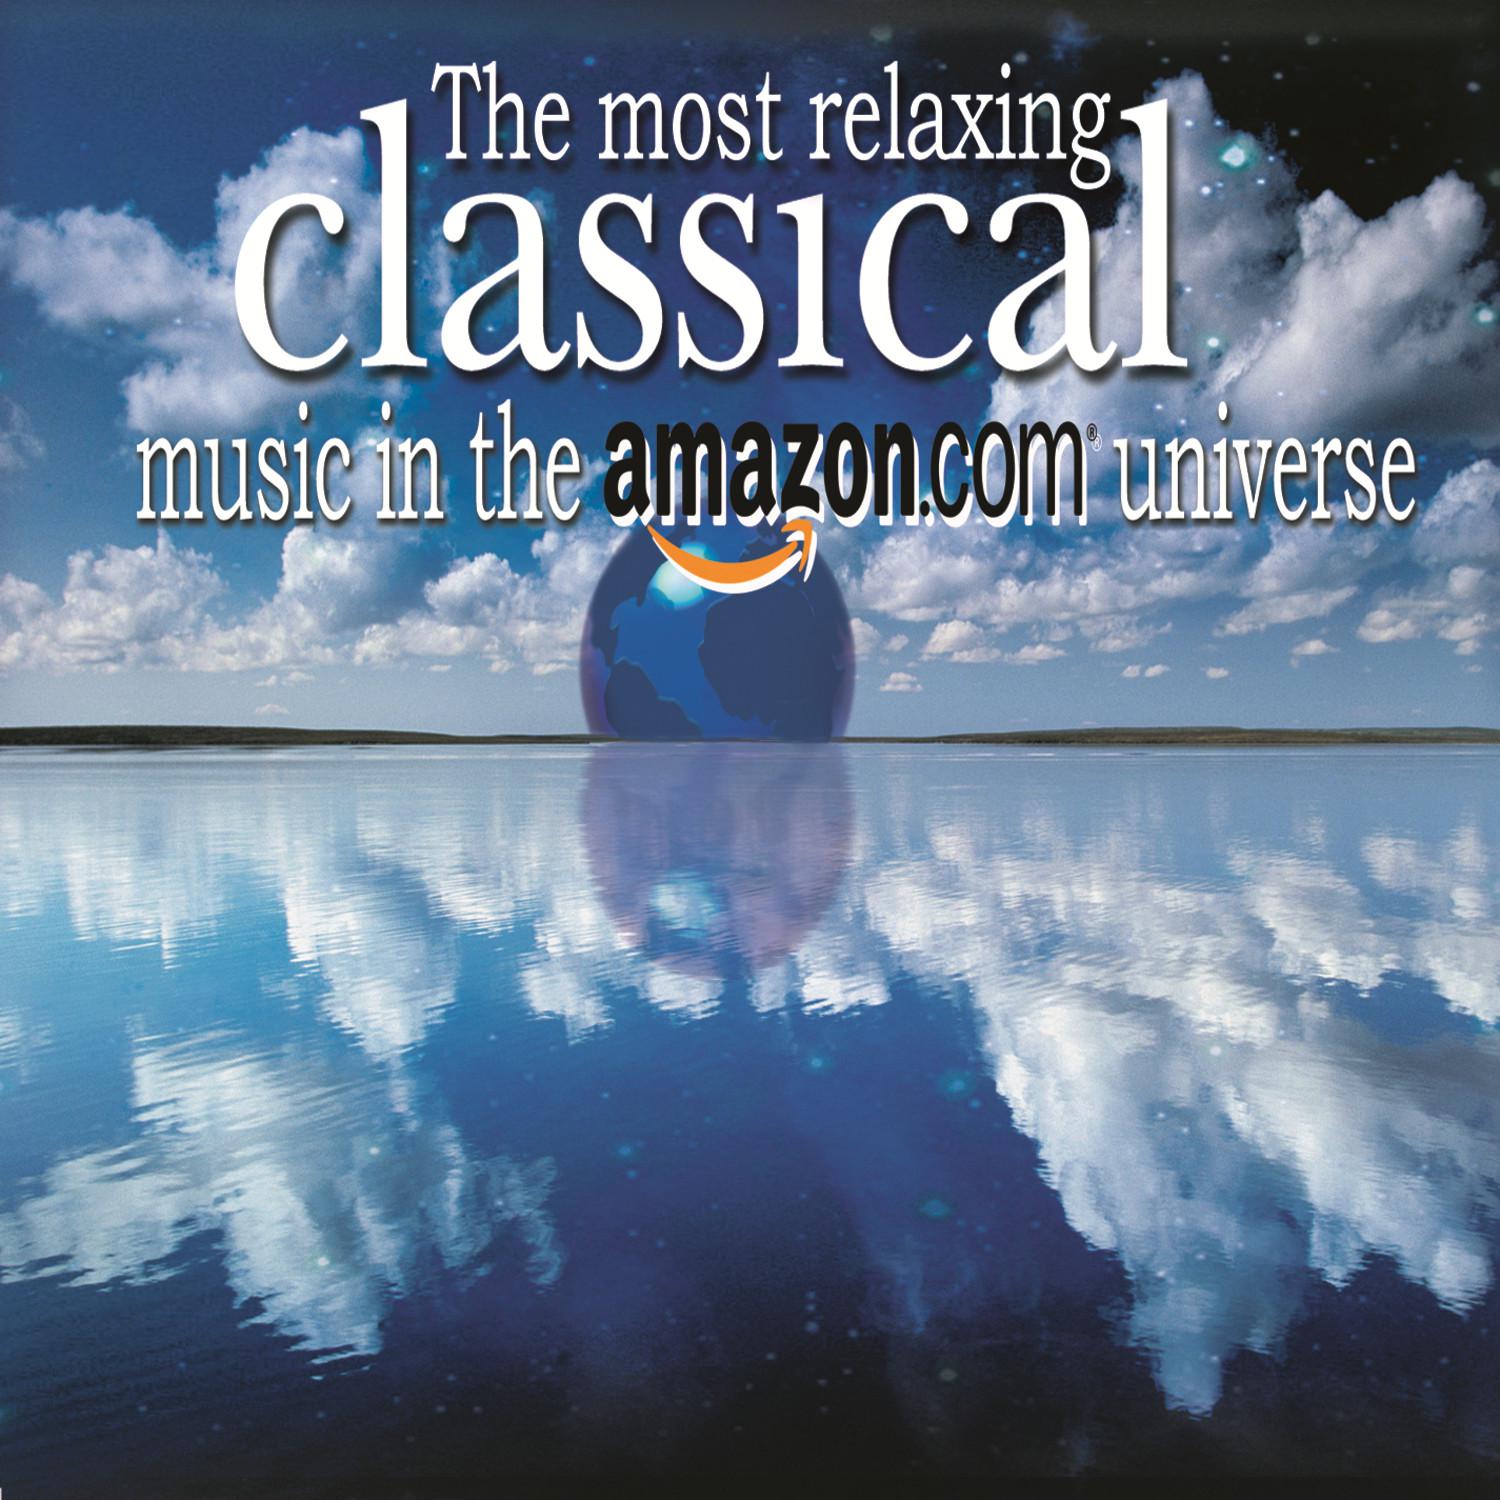 The Most Relaxing Classical Music in Amazon's Universe